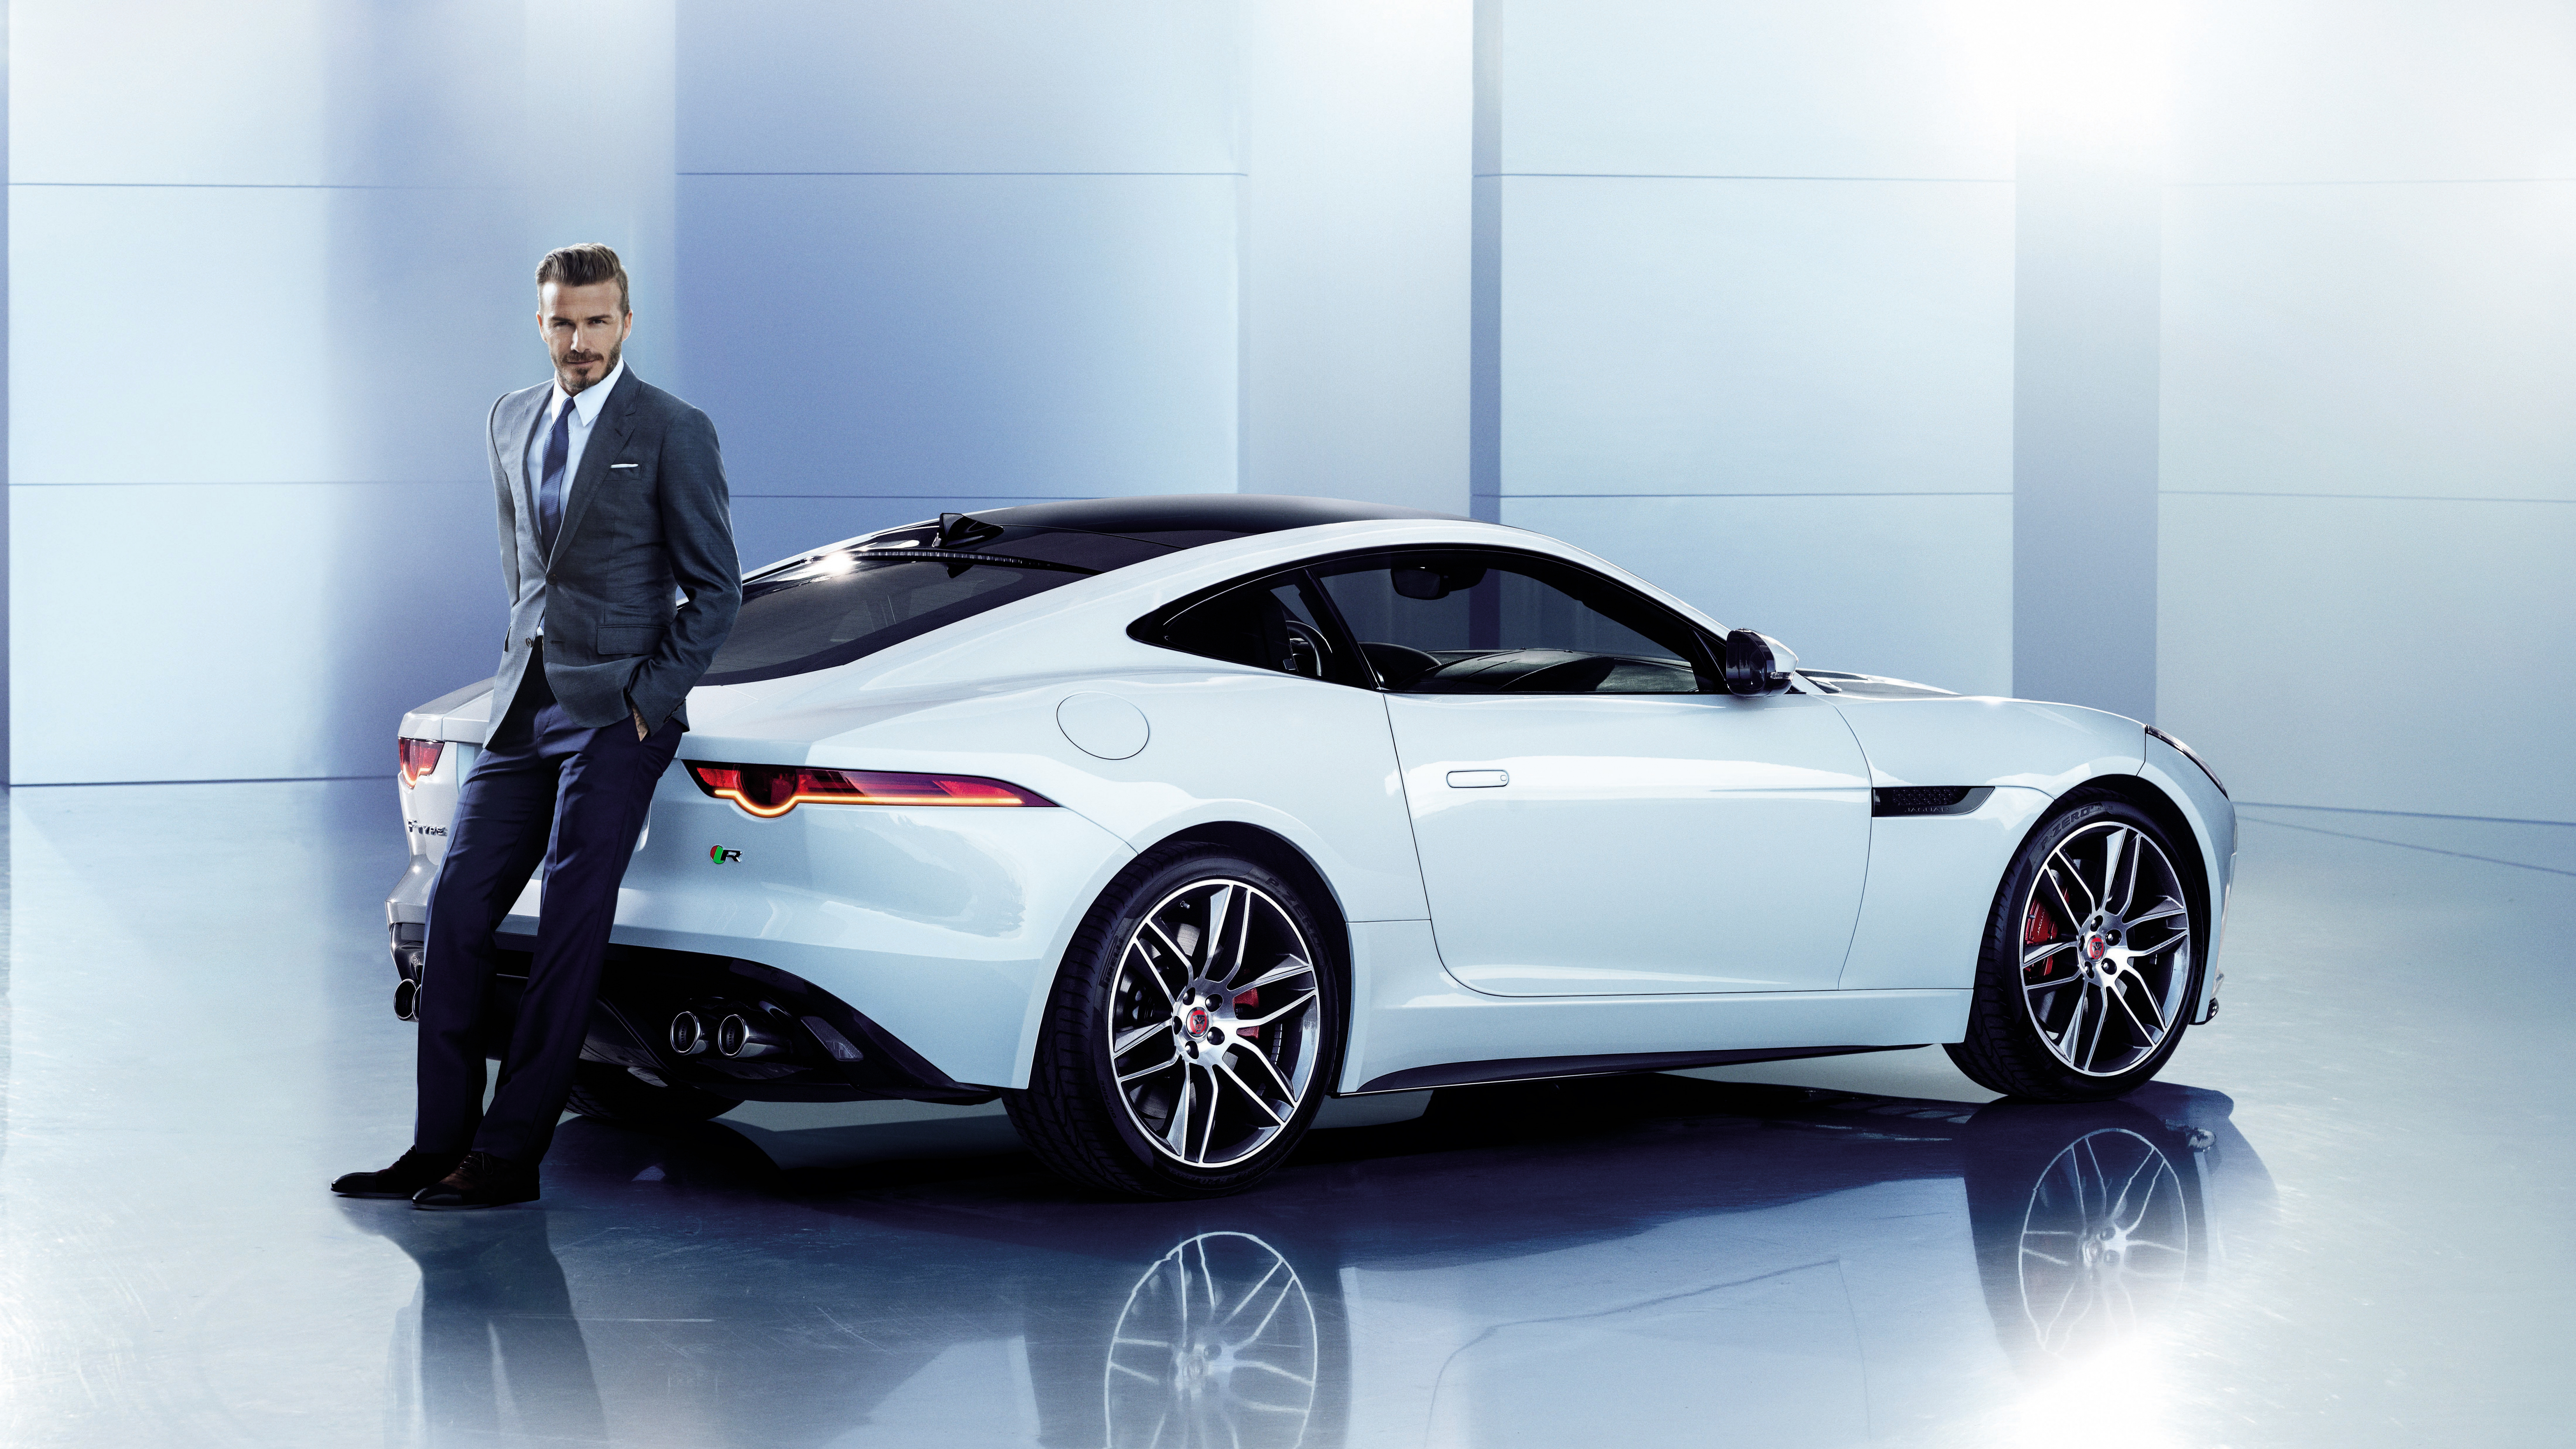 Man in Black Suit Standing Beside White Porsche 911 Coupe. Wallpaper in 7680x4320 Resolution